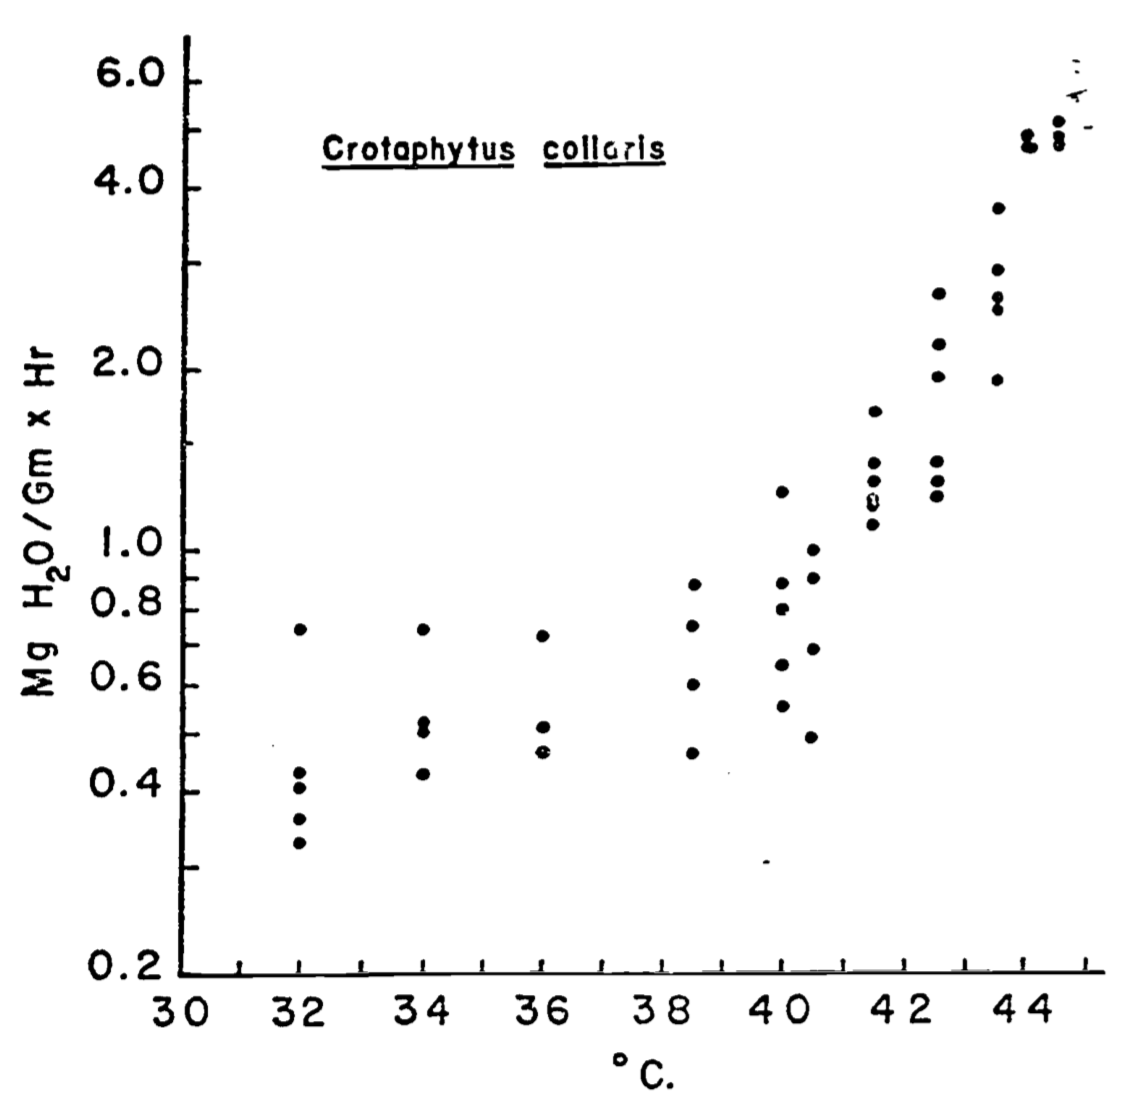 Relation of evaporative water loss to ambient temperature in collared lizards weighing 25-35g. Data represent minimal values at various temperatures for animals studied. (From Dawson, W.R., and J.R. Templeton. 1963. P. 231.)